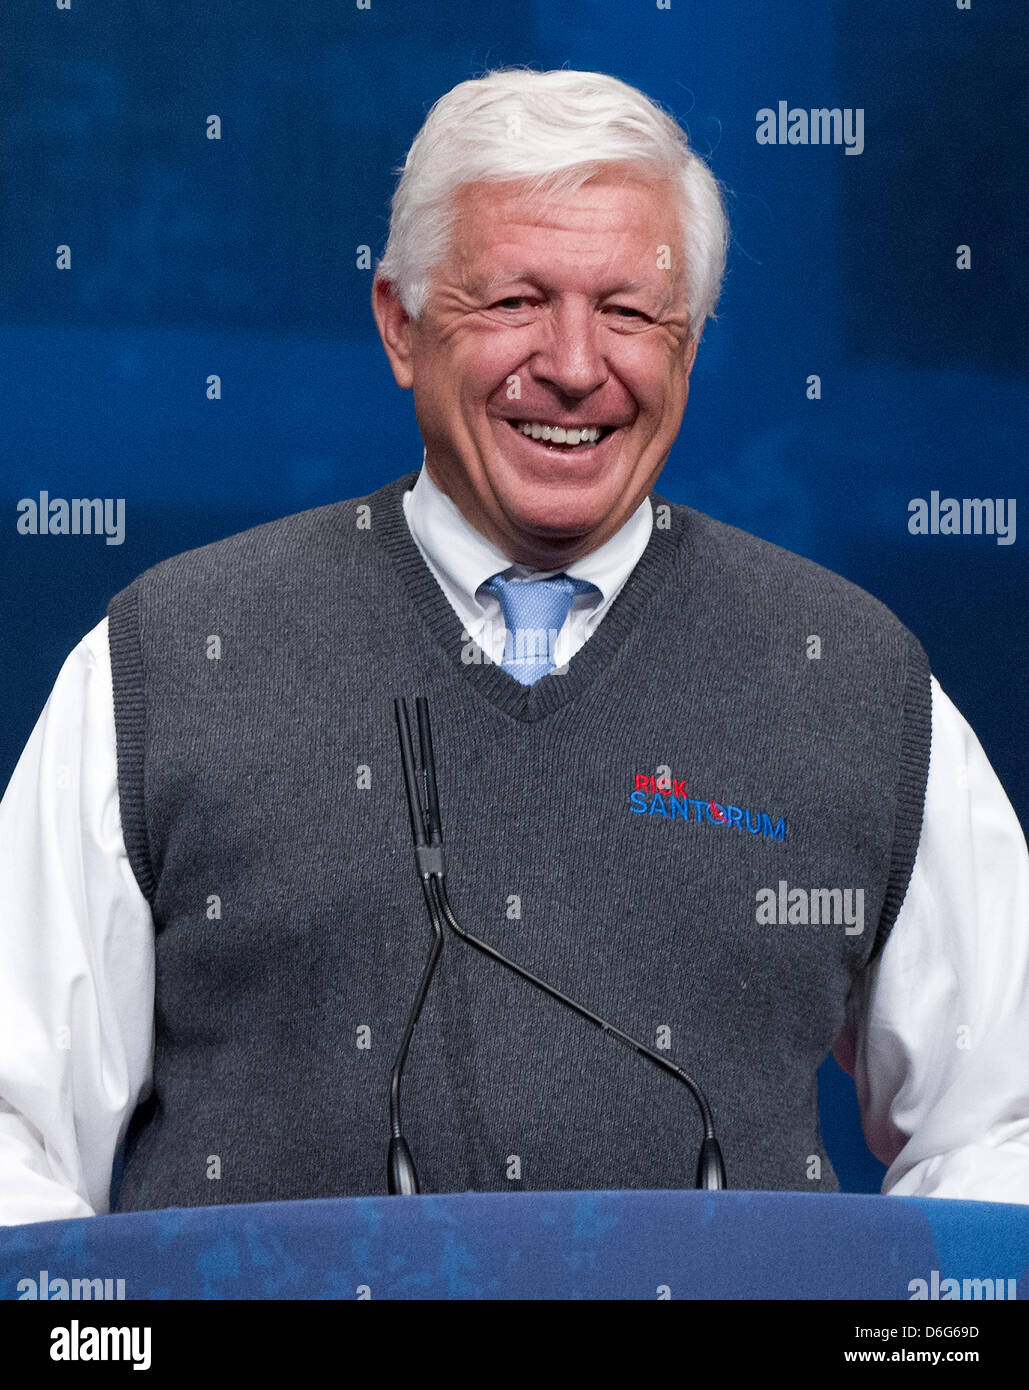 Foster Friess, Chairman, Friess Associates, introduces former United States Senator Rick Santorum (Republican of Pennsylvania), a candidate for the 2012 Republican Party nomination for President of the United States, at the 2012 CPAC Conference at the Marriott Wardman Park Hotel in Washington, D.C. on Friday, February 10, 2012..Credit: Ron Sachs / CNP Stock Photo